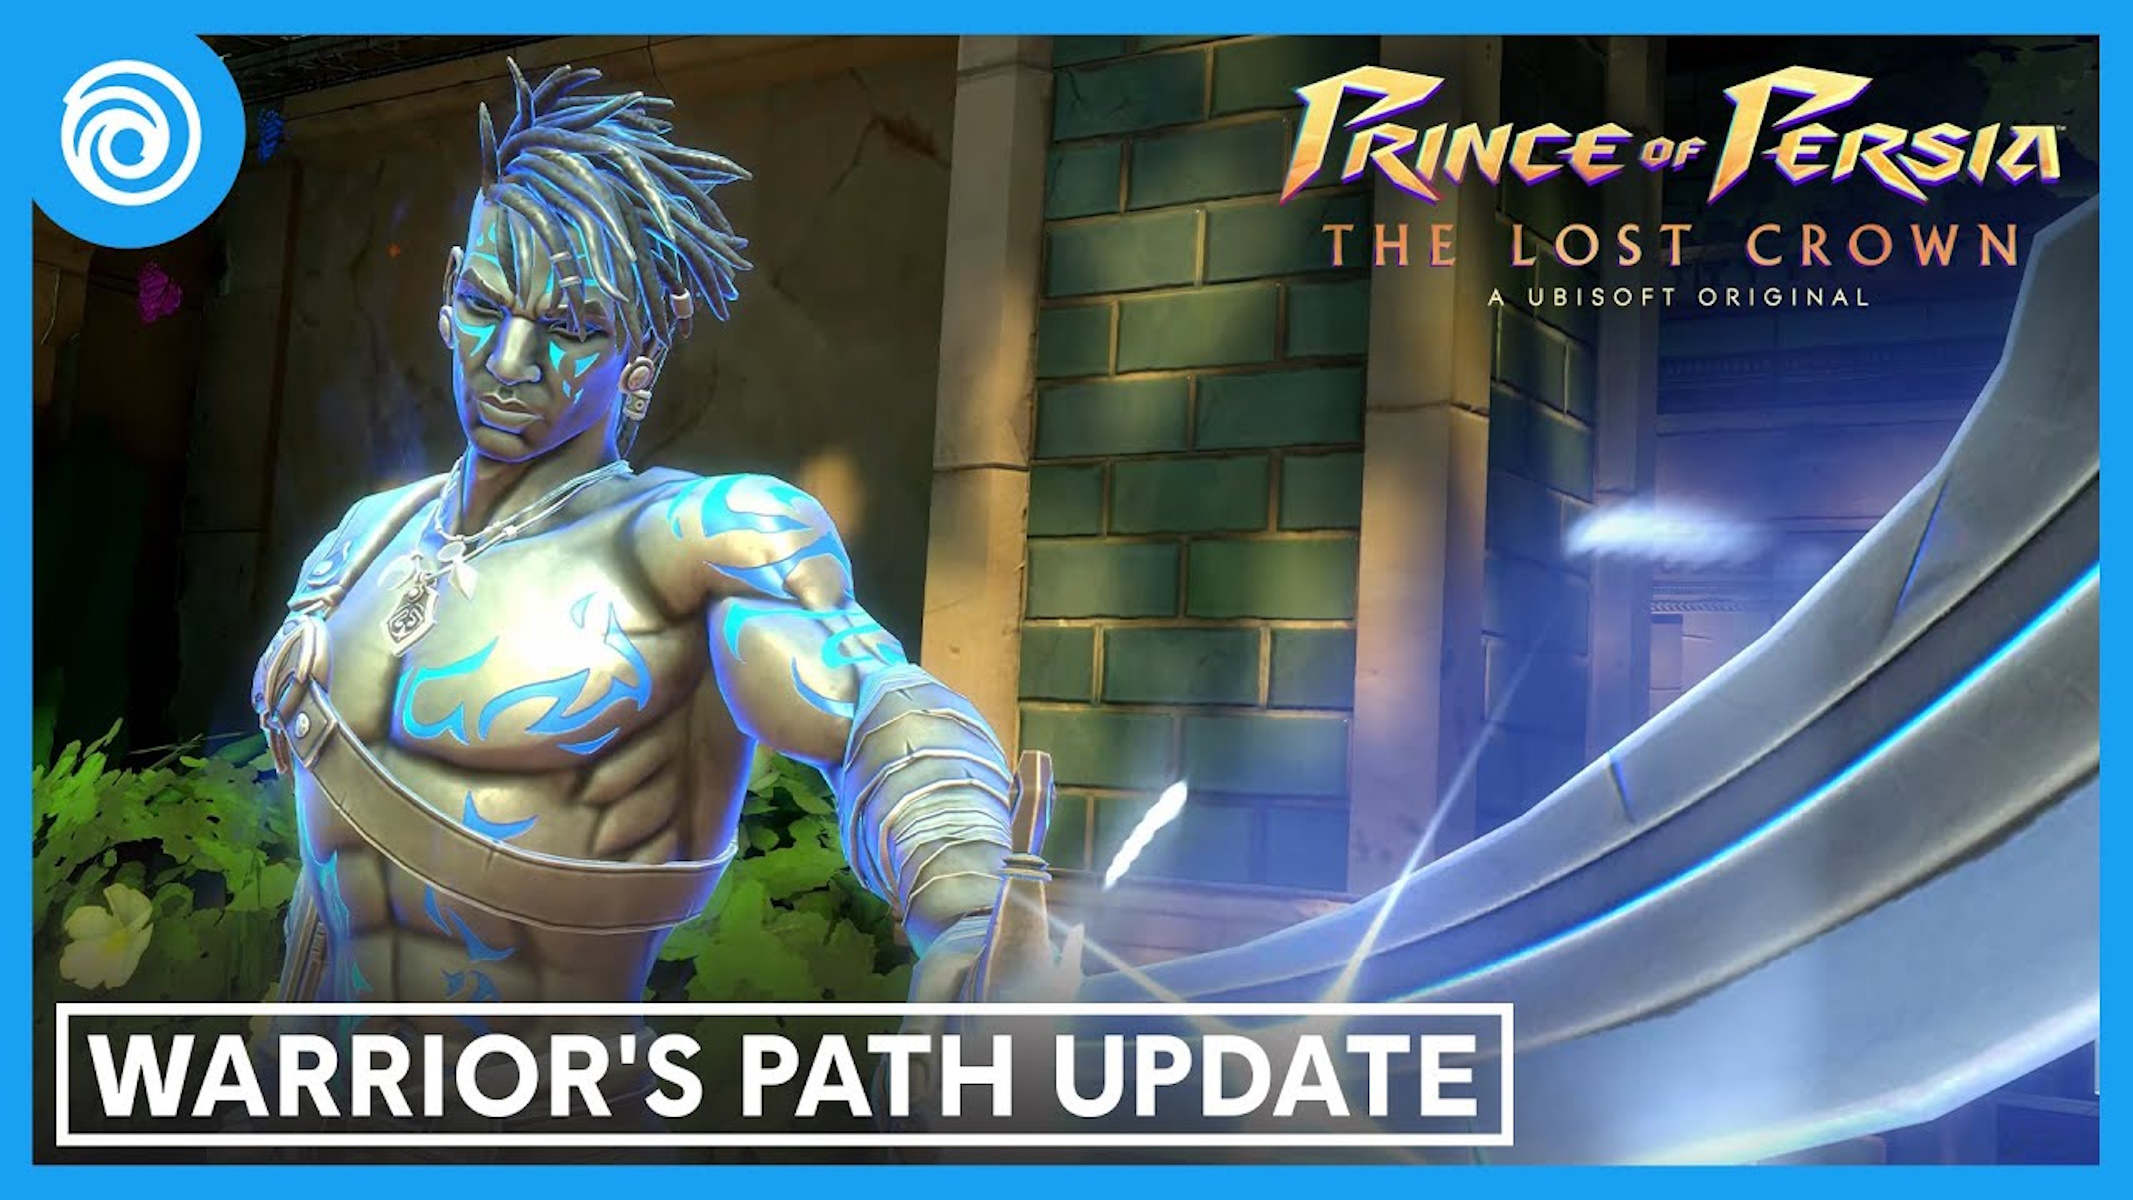 Prince of Persia The Last Crown Warrior's Path Update